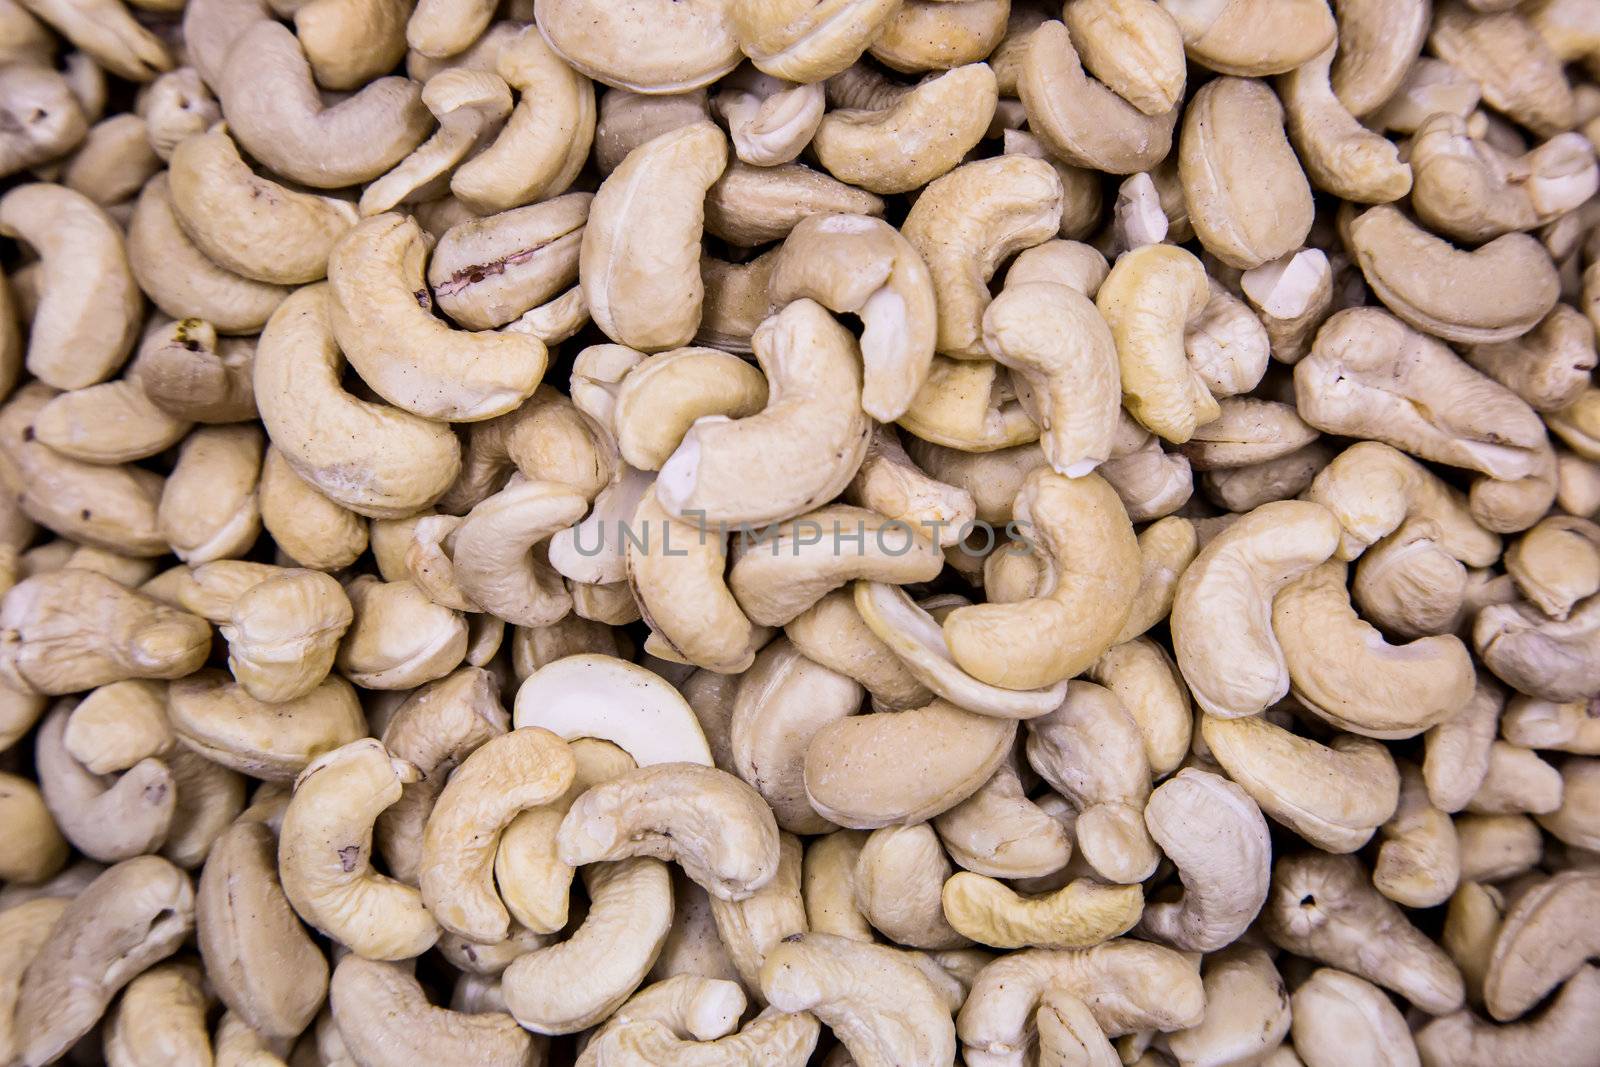 Varieties of nuts: peanuts, hazelnuts, chestnuts, walnuts, pistachio and pecans. Food and cuisine.